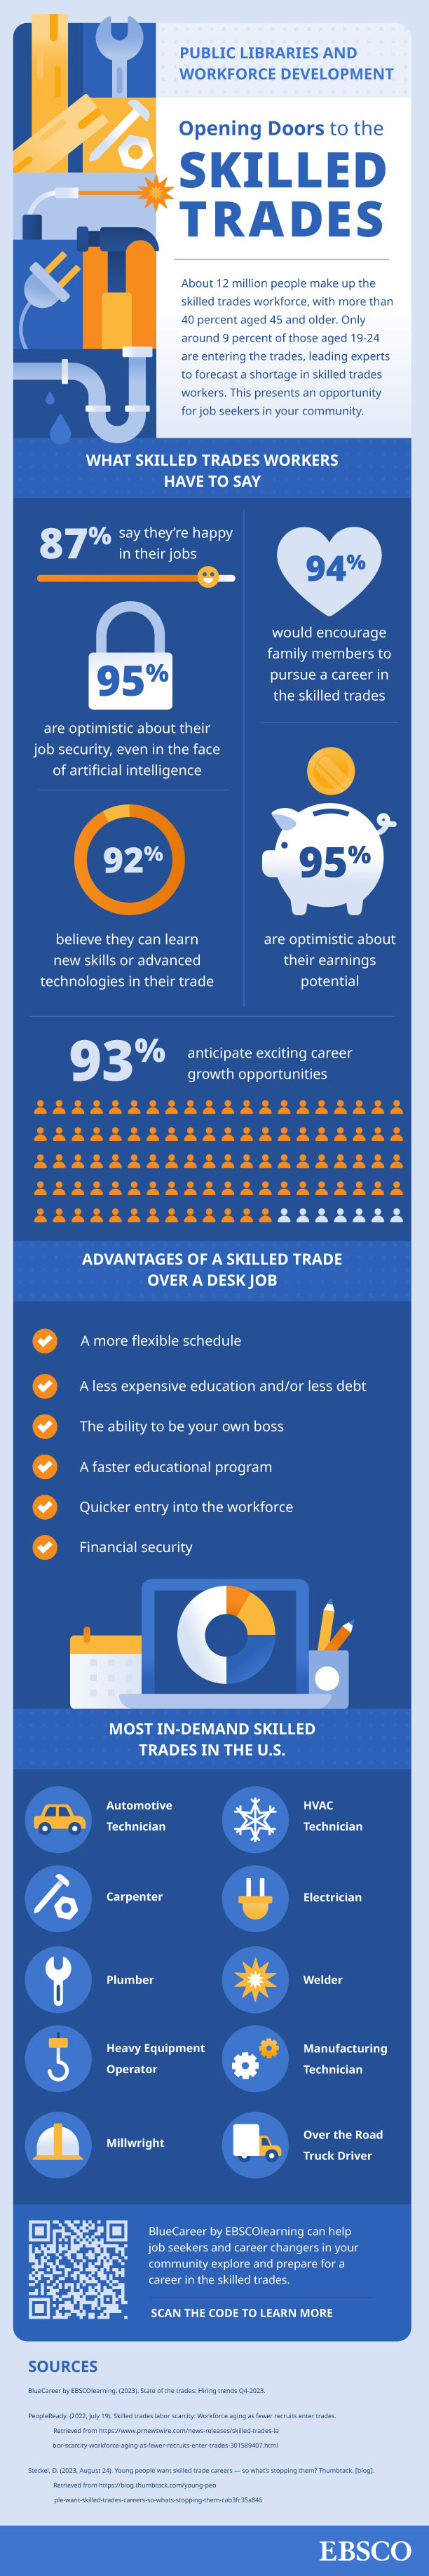 An infographic about the state of skilled trades and hiring trends